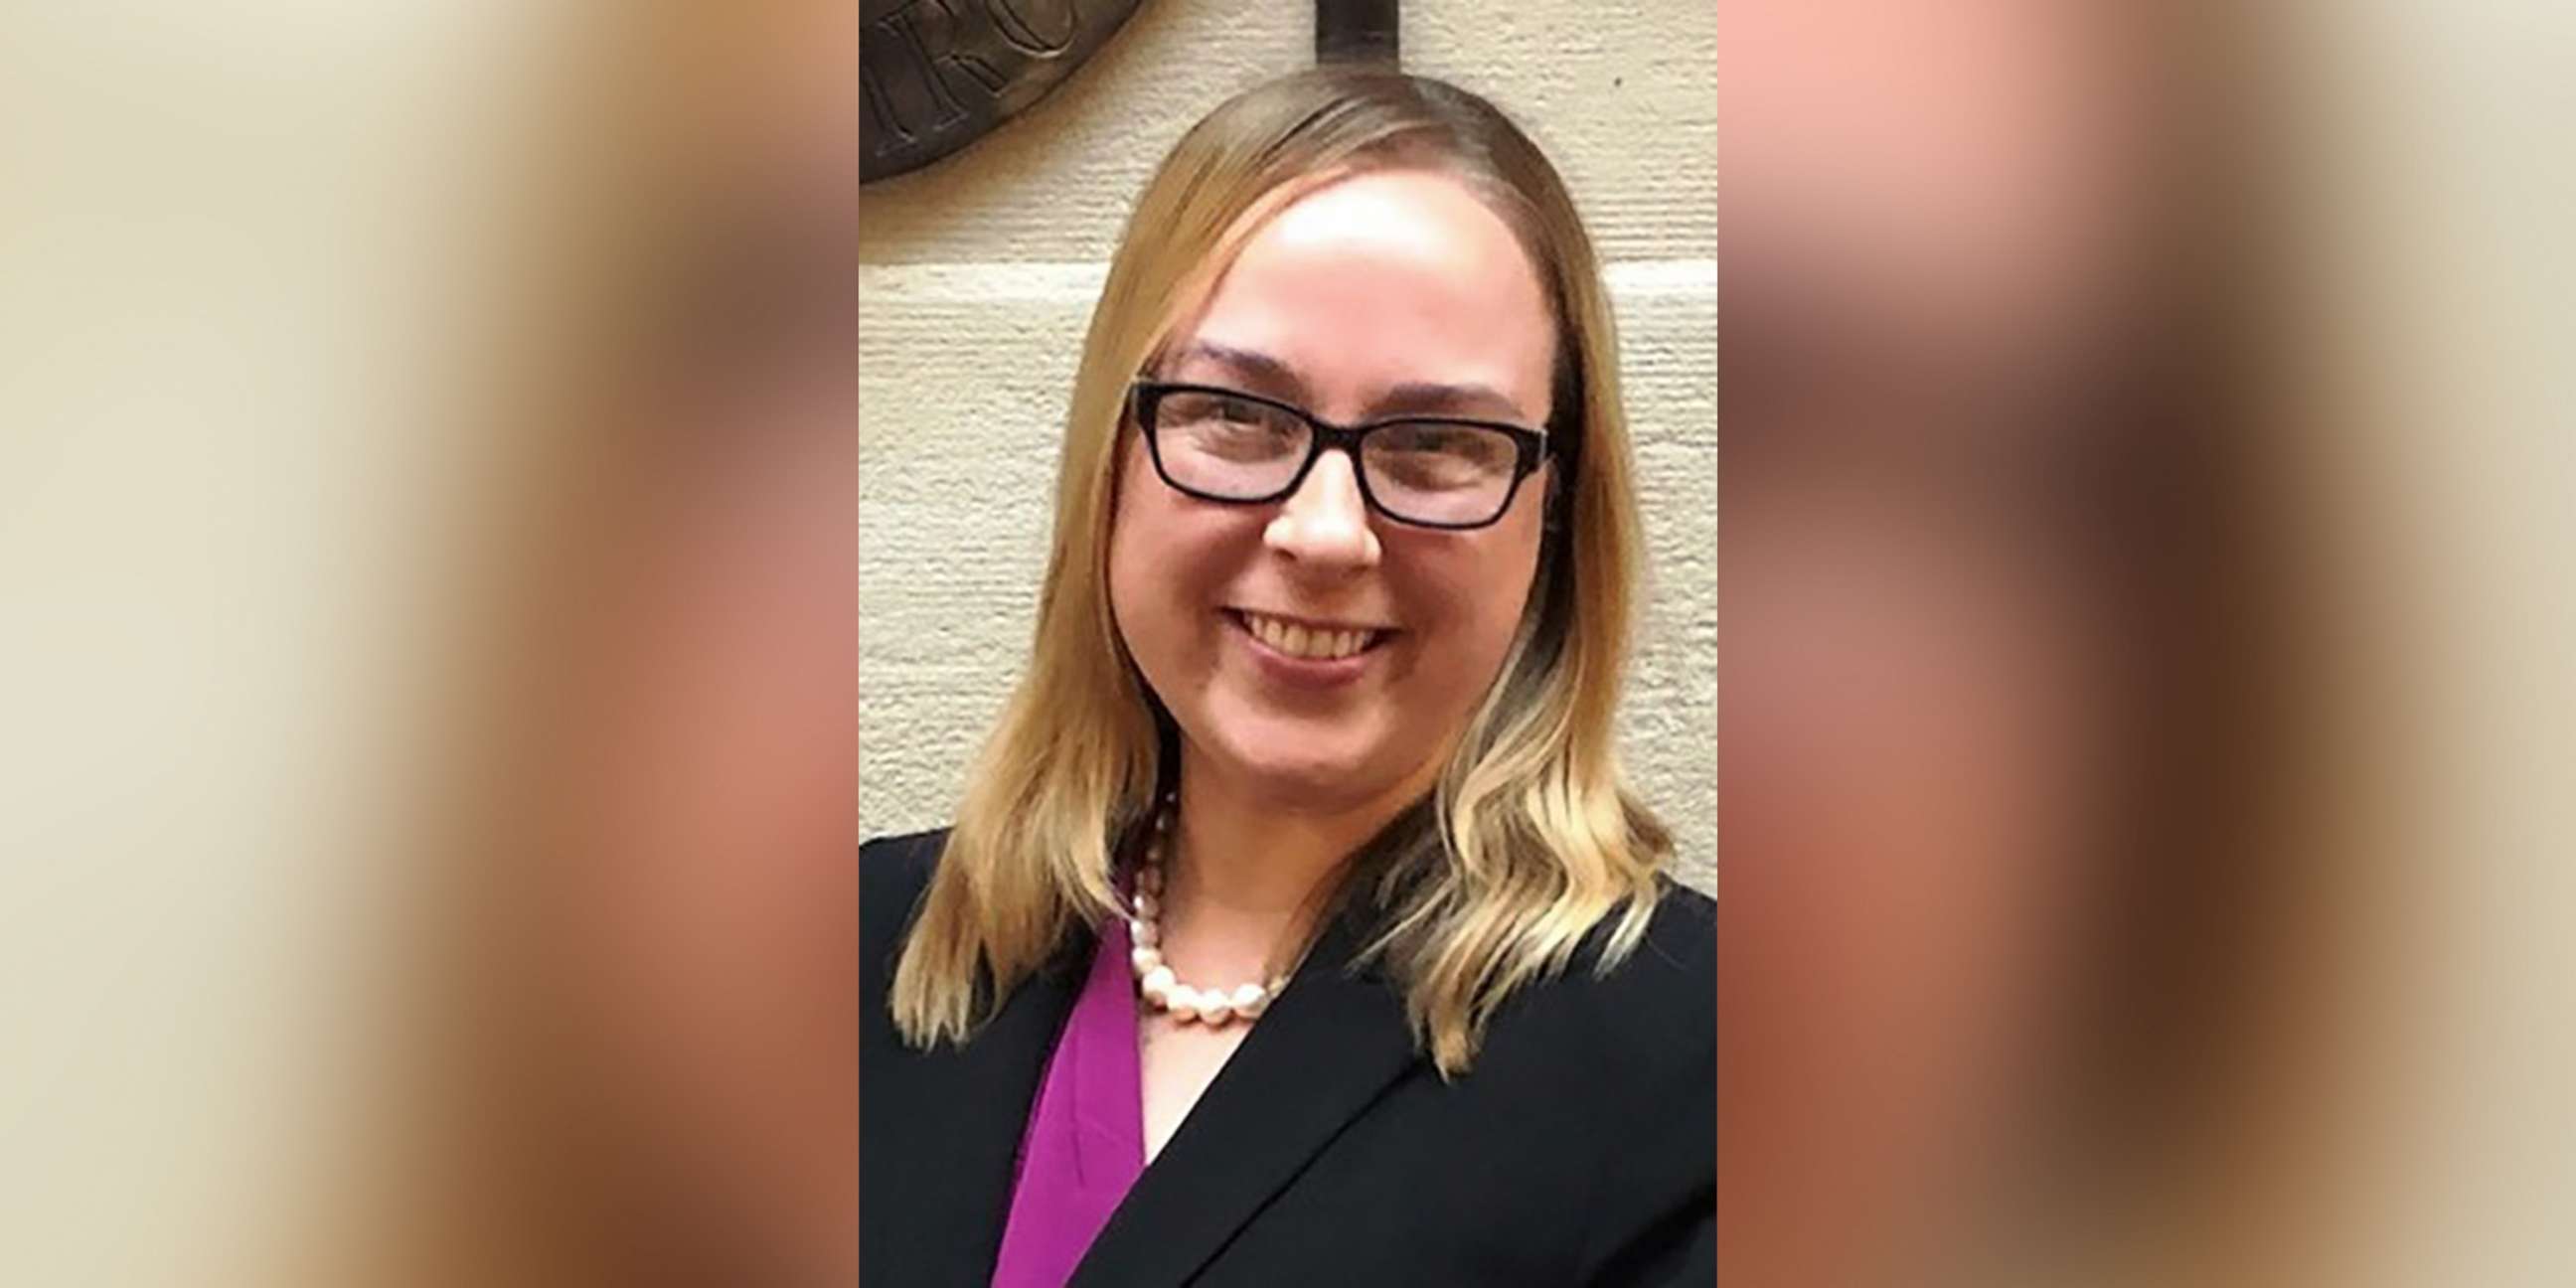 PHOTO: Stacia Hollingshead, pictured in this undated photo, was fatally shot on March 23, 2019, in Beaver Dam, Wis.